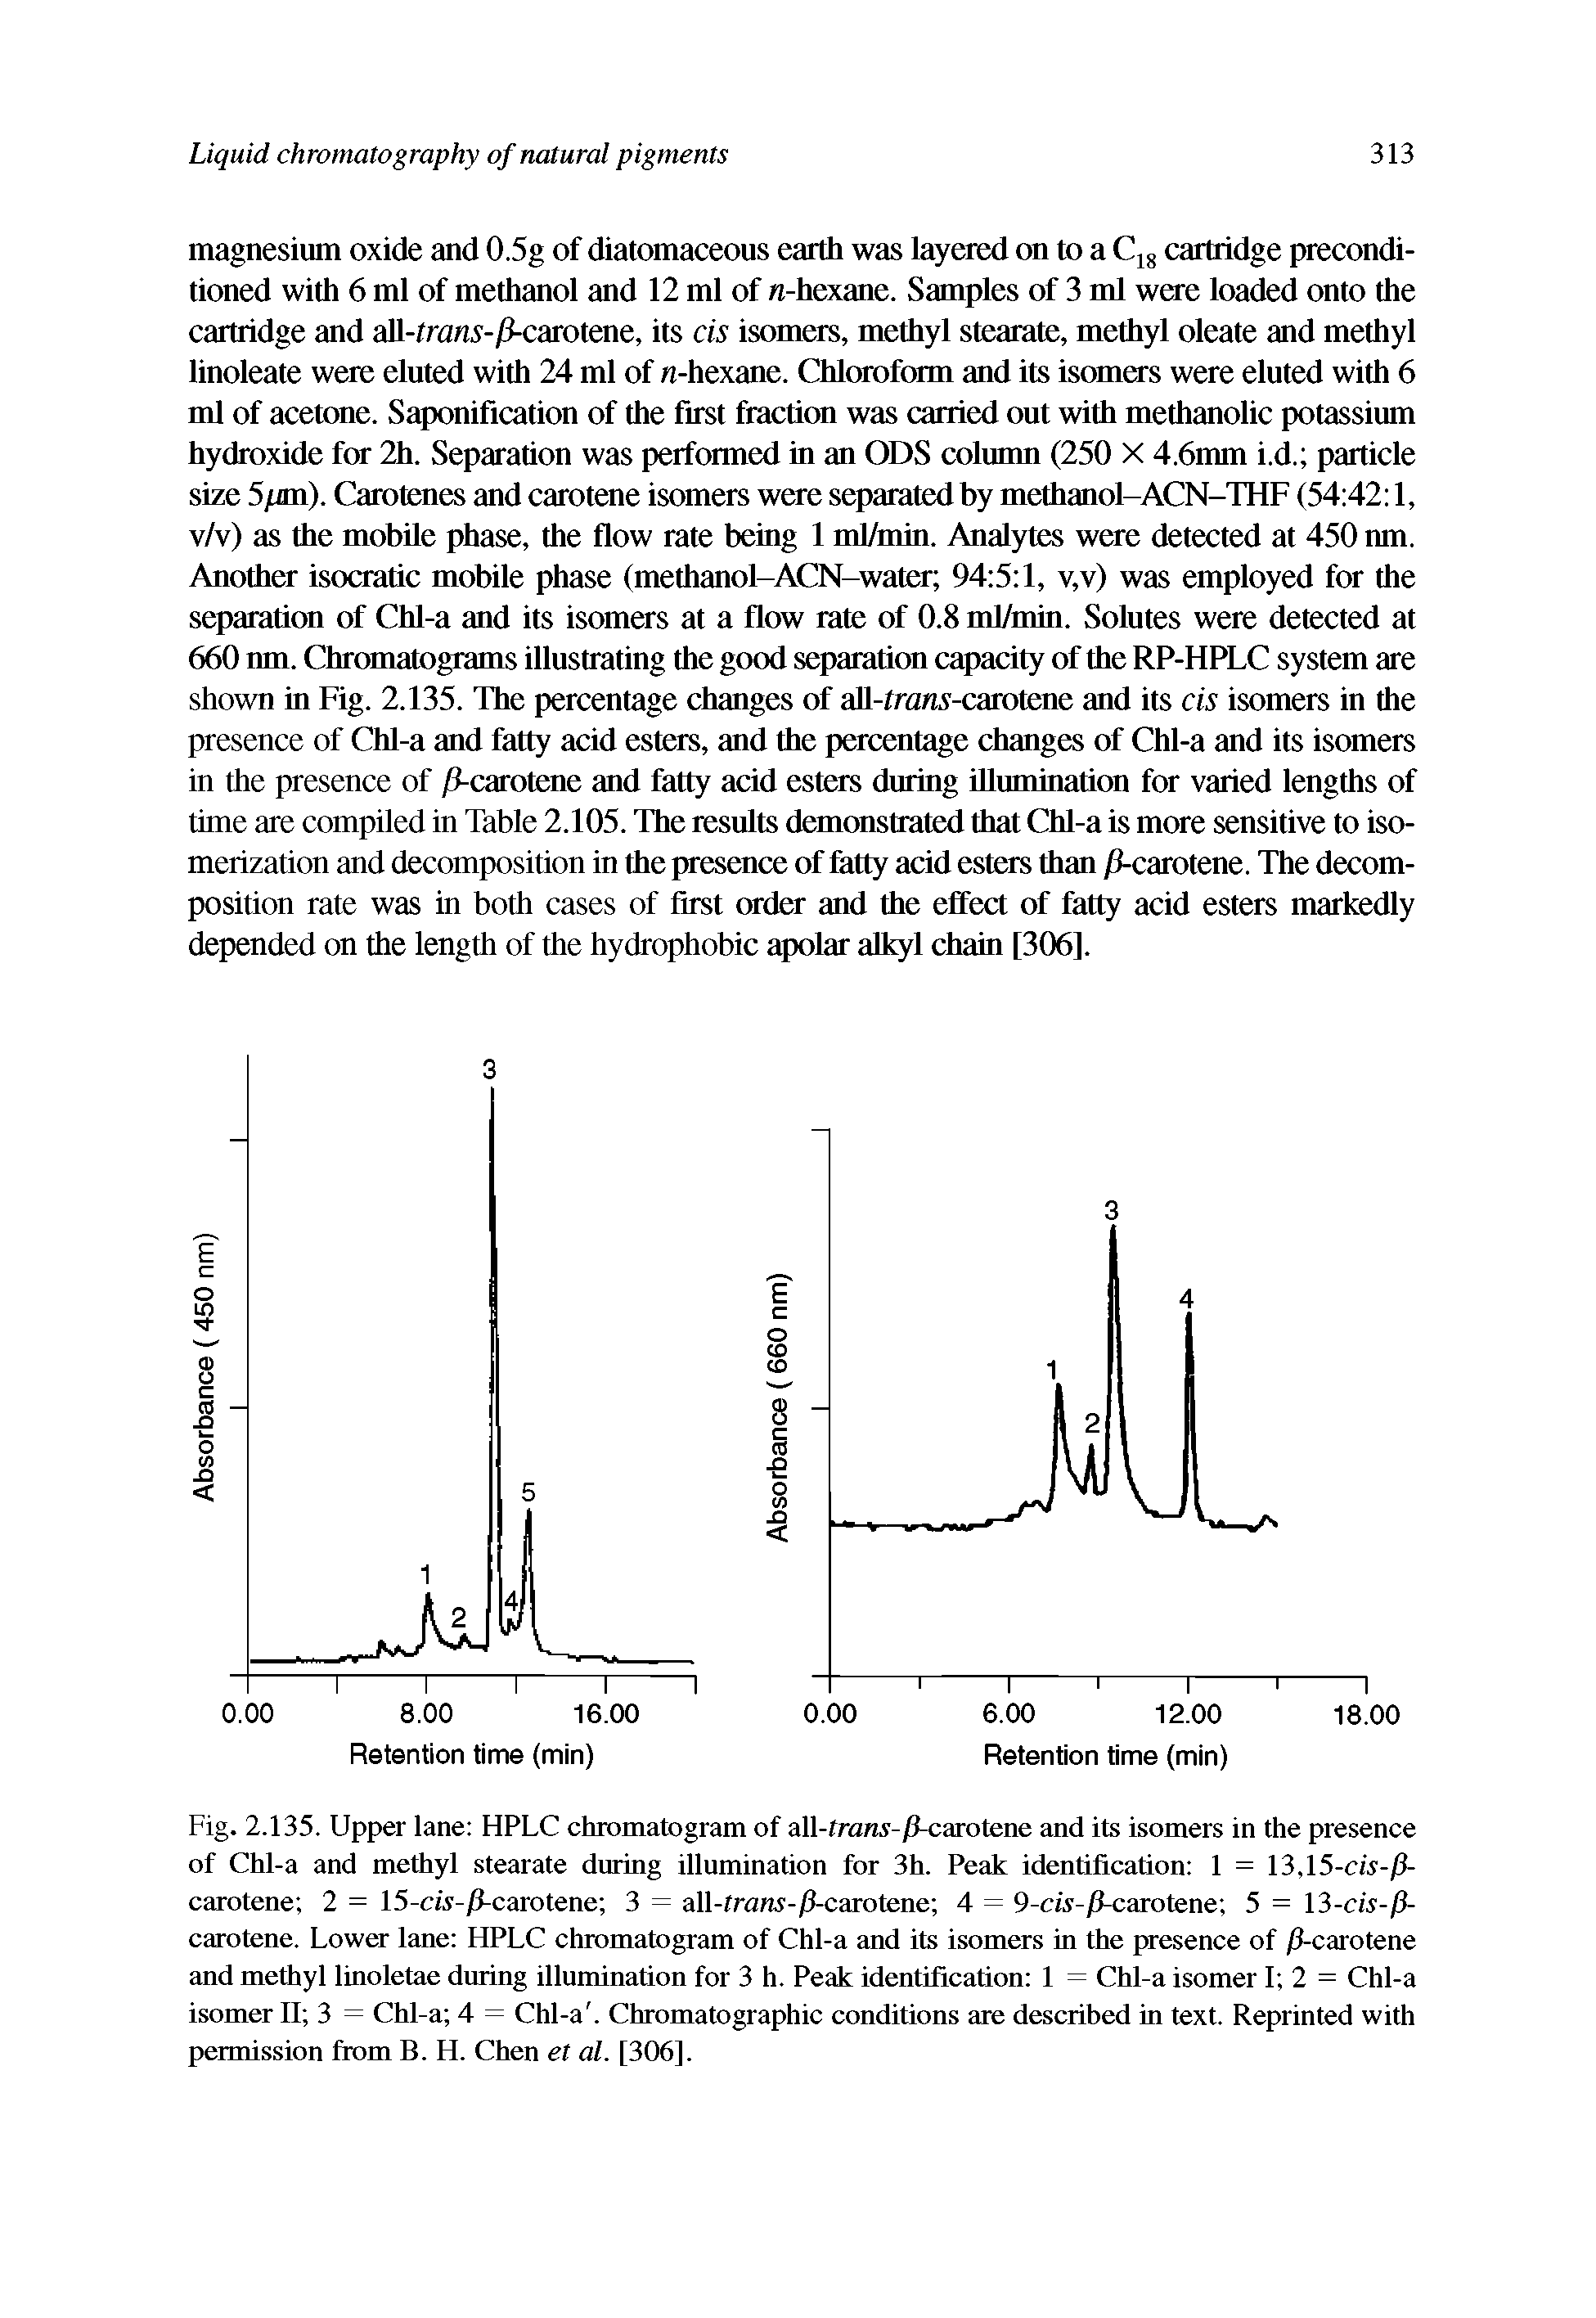 Fig. 2.135. Upper lane HPLC chromatogram of all-rran.v /l-carolcnc and its isomers in the presence of Chl-a and methyl stearate during illumination for 3h. Peak identification 1 = 13,15-cis-ji-carotene 2 = 15-cw-/fcarotene 3 = a 11 -1 ra ns - /1-c aro tc n c 4 = 9-c(.v-/l-carolene 5 = 13-cis-ji-carotene. Lower lane HPLC chromatogram of Chl-a and its isomers in the presence of /1-carotene and methyl linoletae during illumination for 3 h. Peak identification 1 = Chl-a isomer I 2 = Chl-a isomer II 3 = Chl-a 4 = Chl-a. Chromatographic conditions are described in text. Reprinted with permission from B. H. Chen et al. [306].